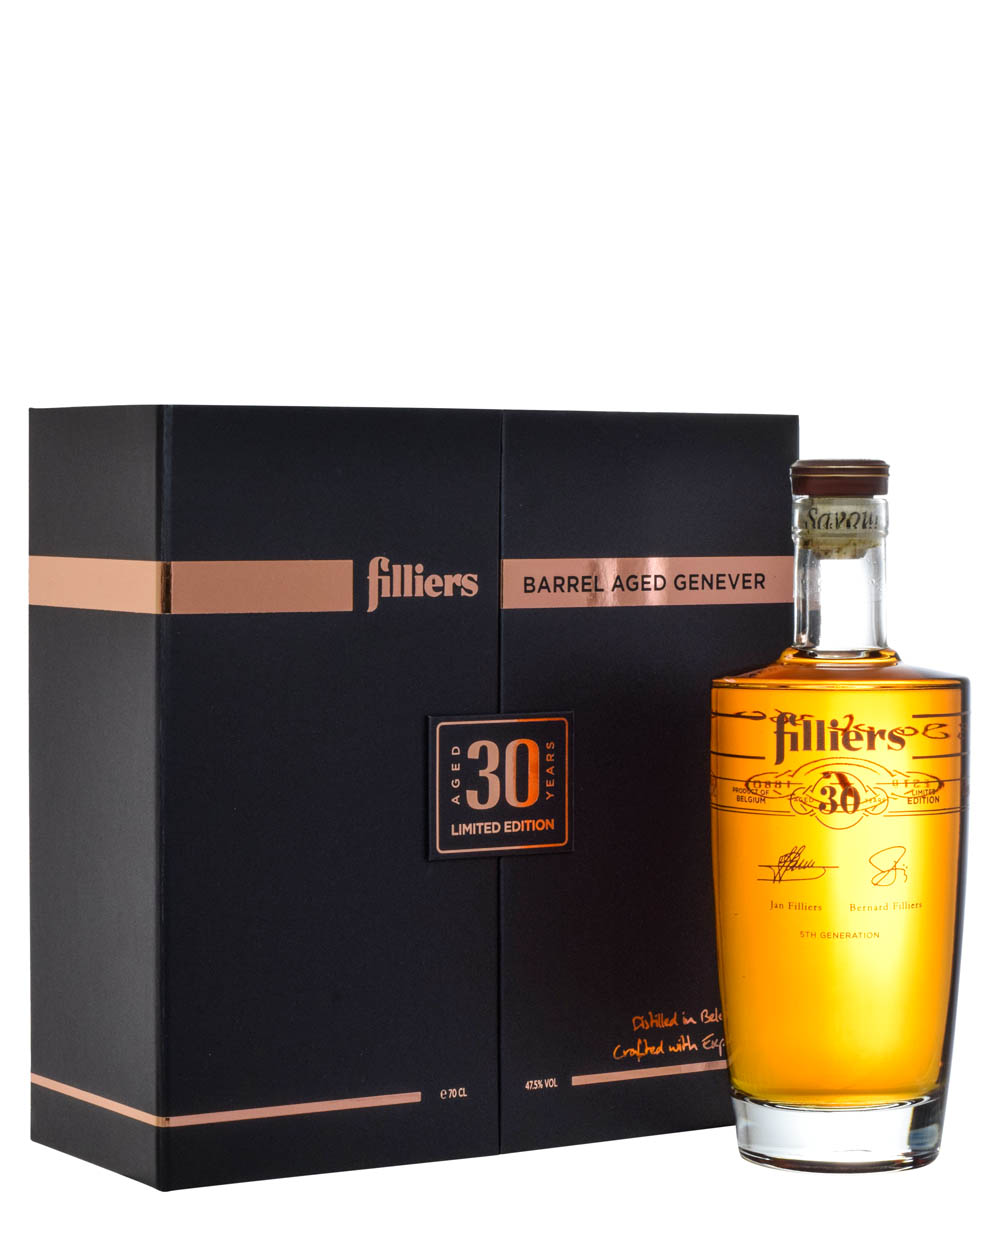 Filliers 30 Years Old Barrel Aged Genever Box 2 Must Have Malts